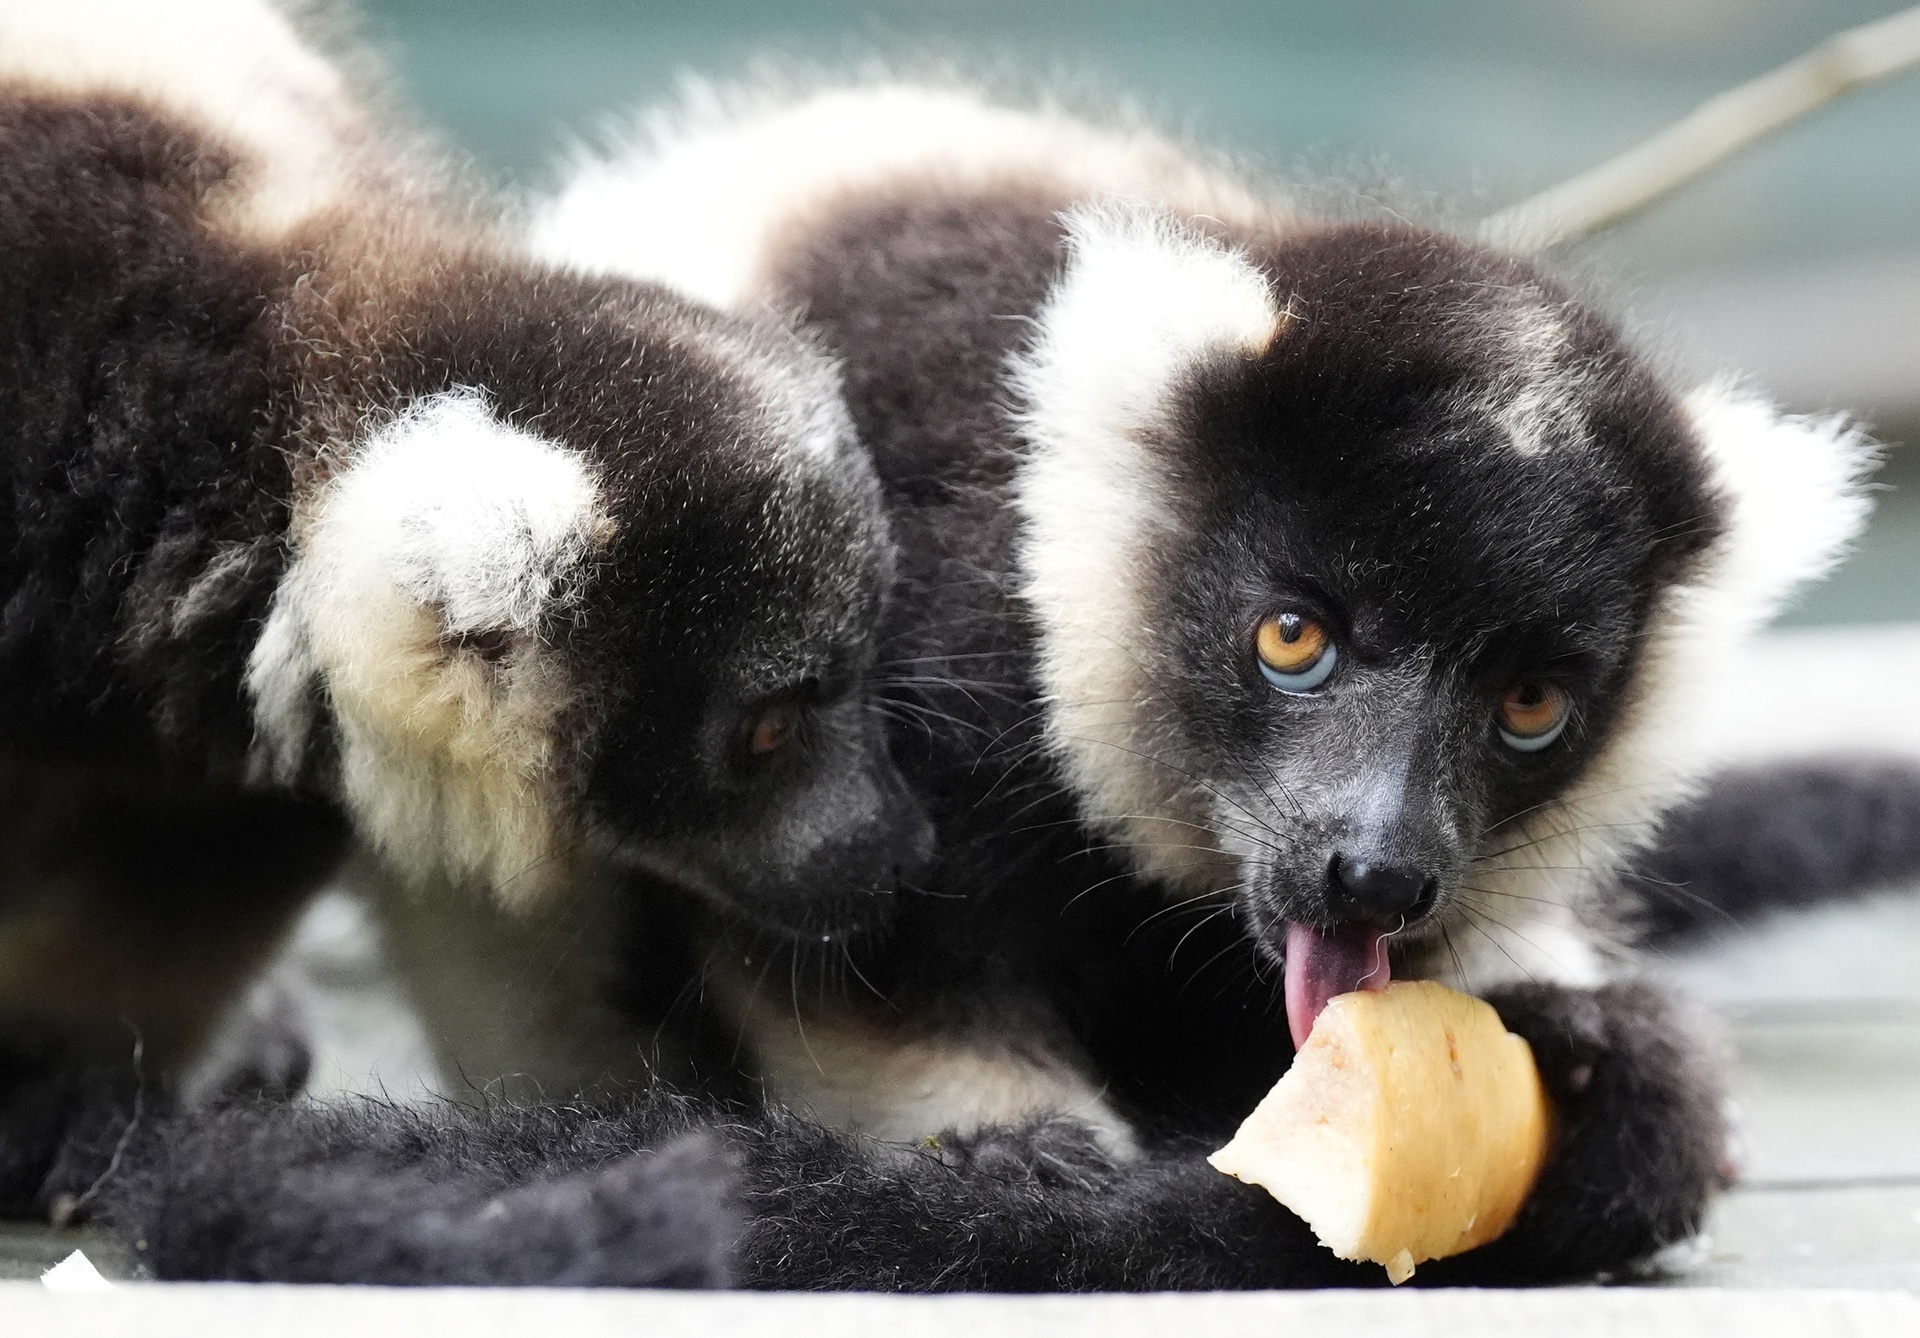 The twins will eventually be rehomed as part of the breeding programme (Andrew Milligan/PA)